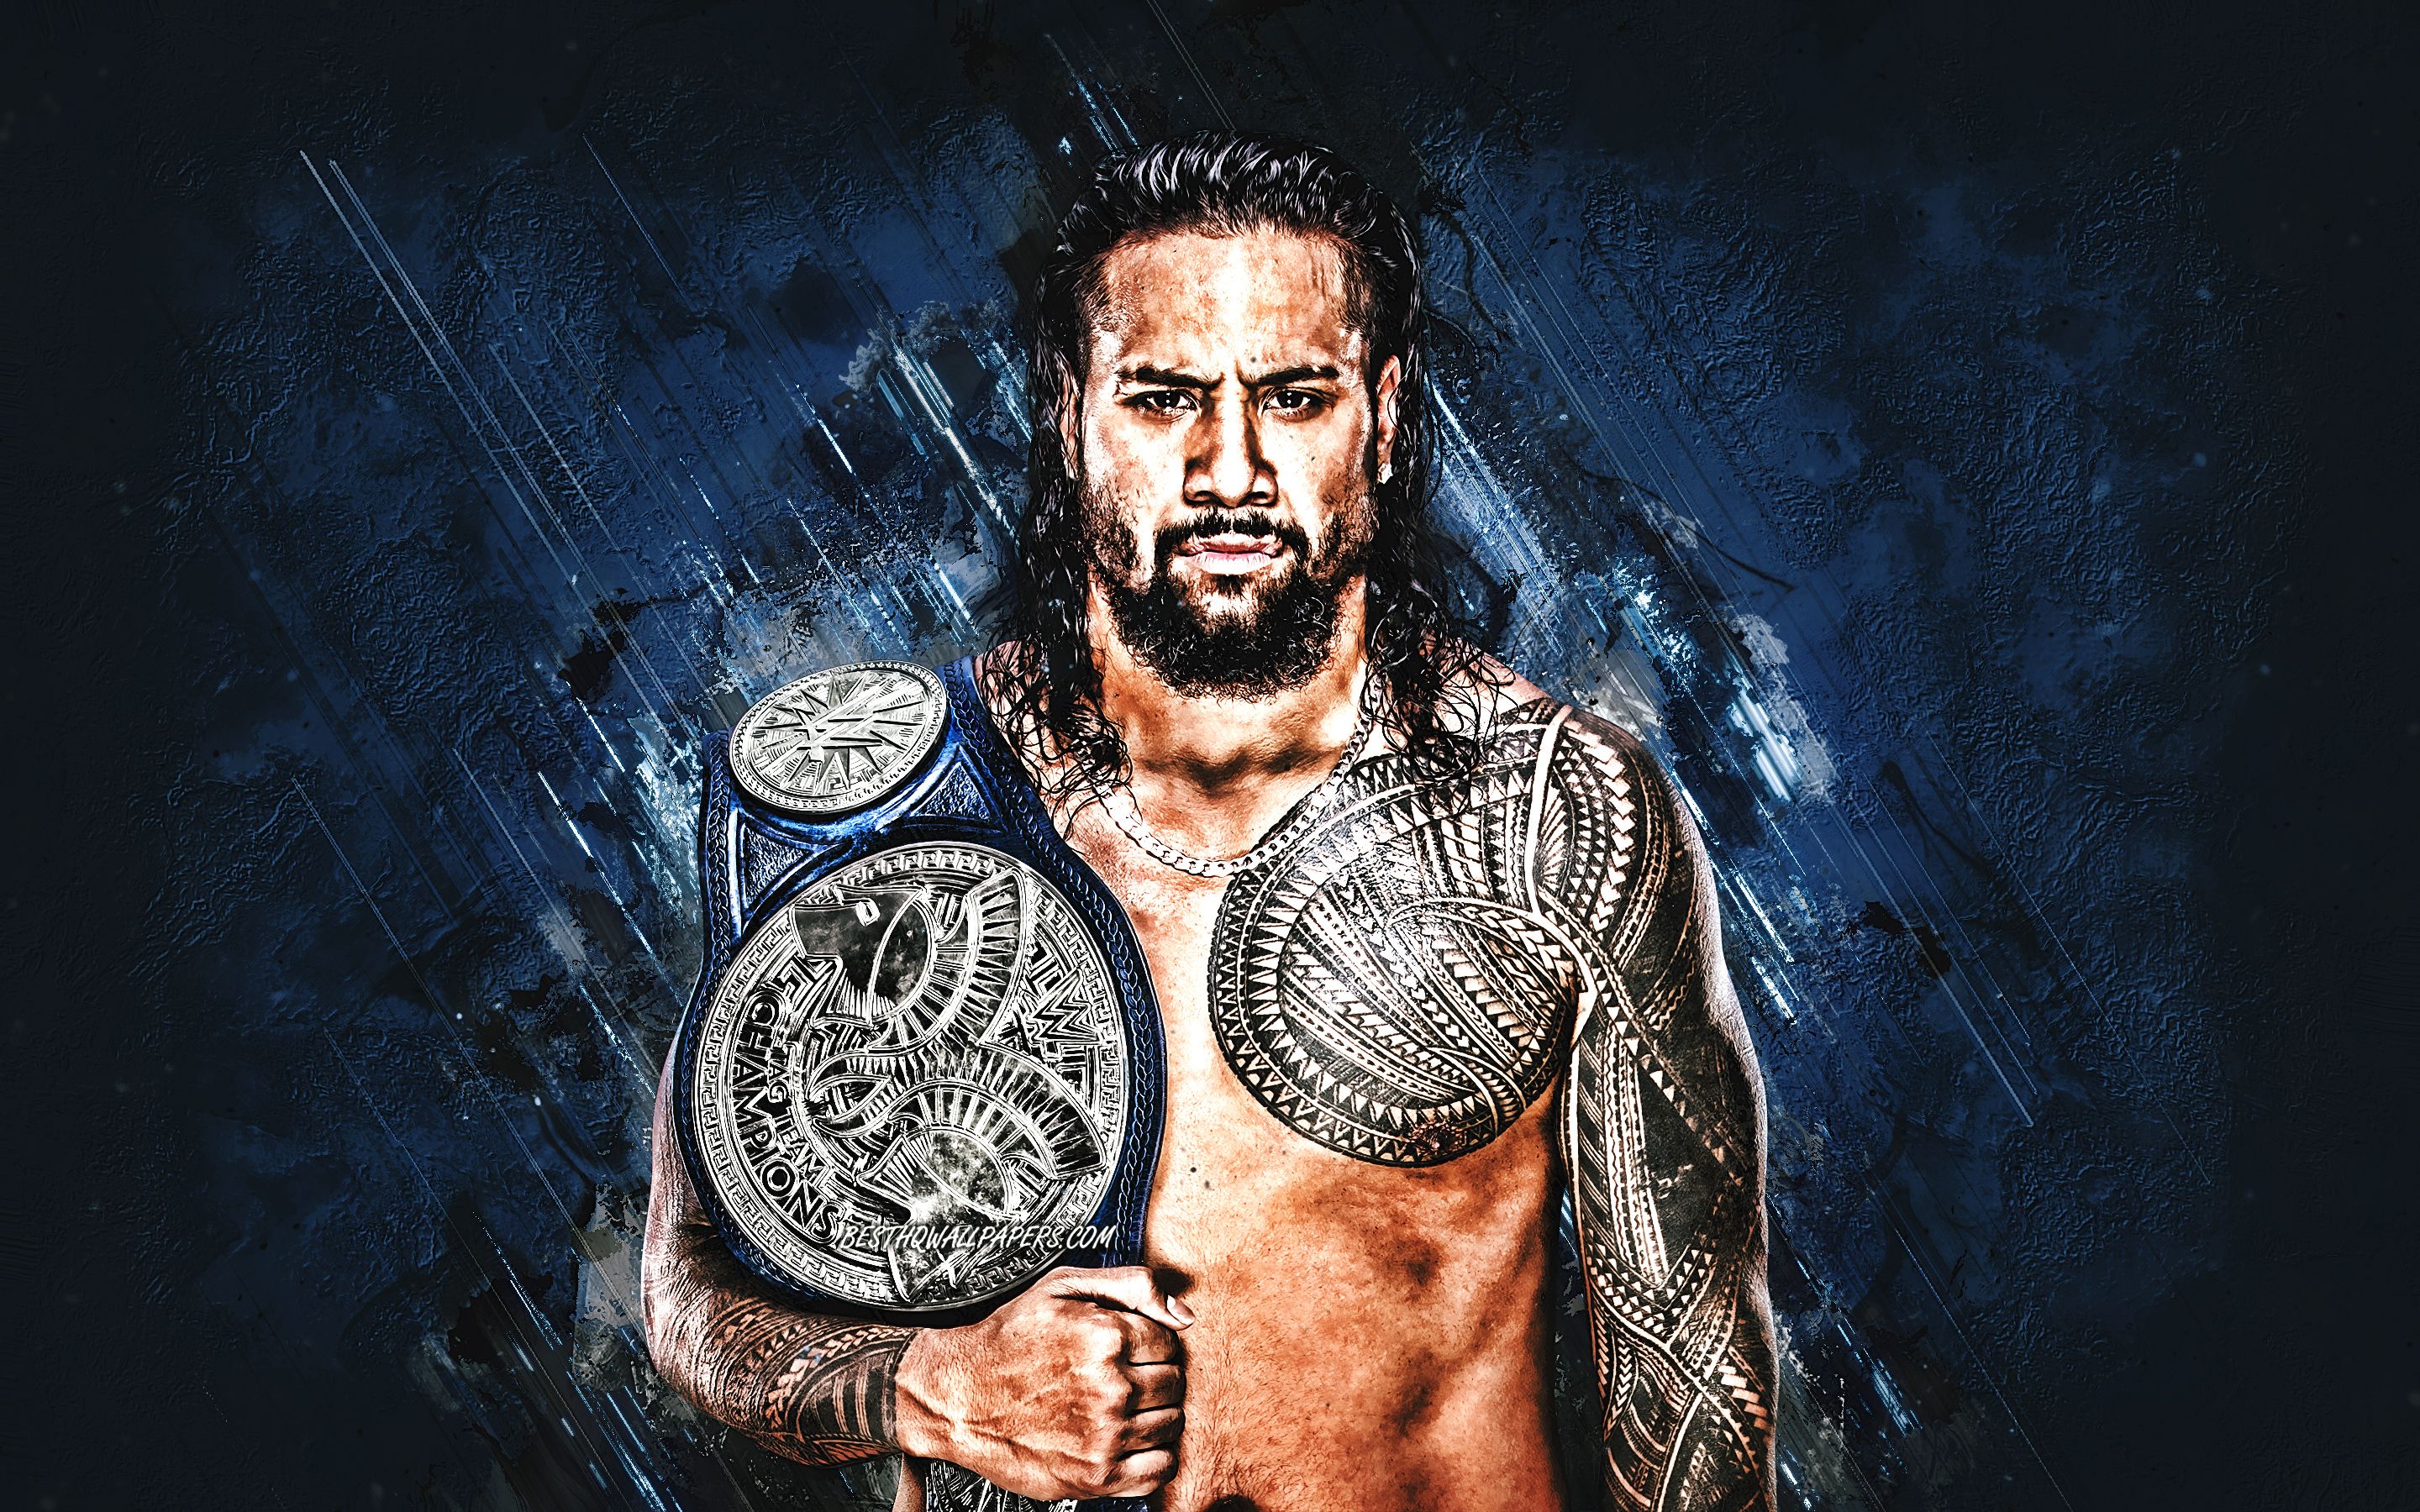 THE USOS WALLPAPER by PeralesWWE on DeviantArt